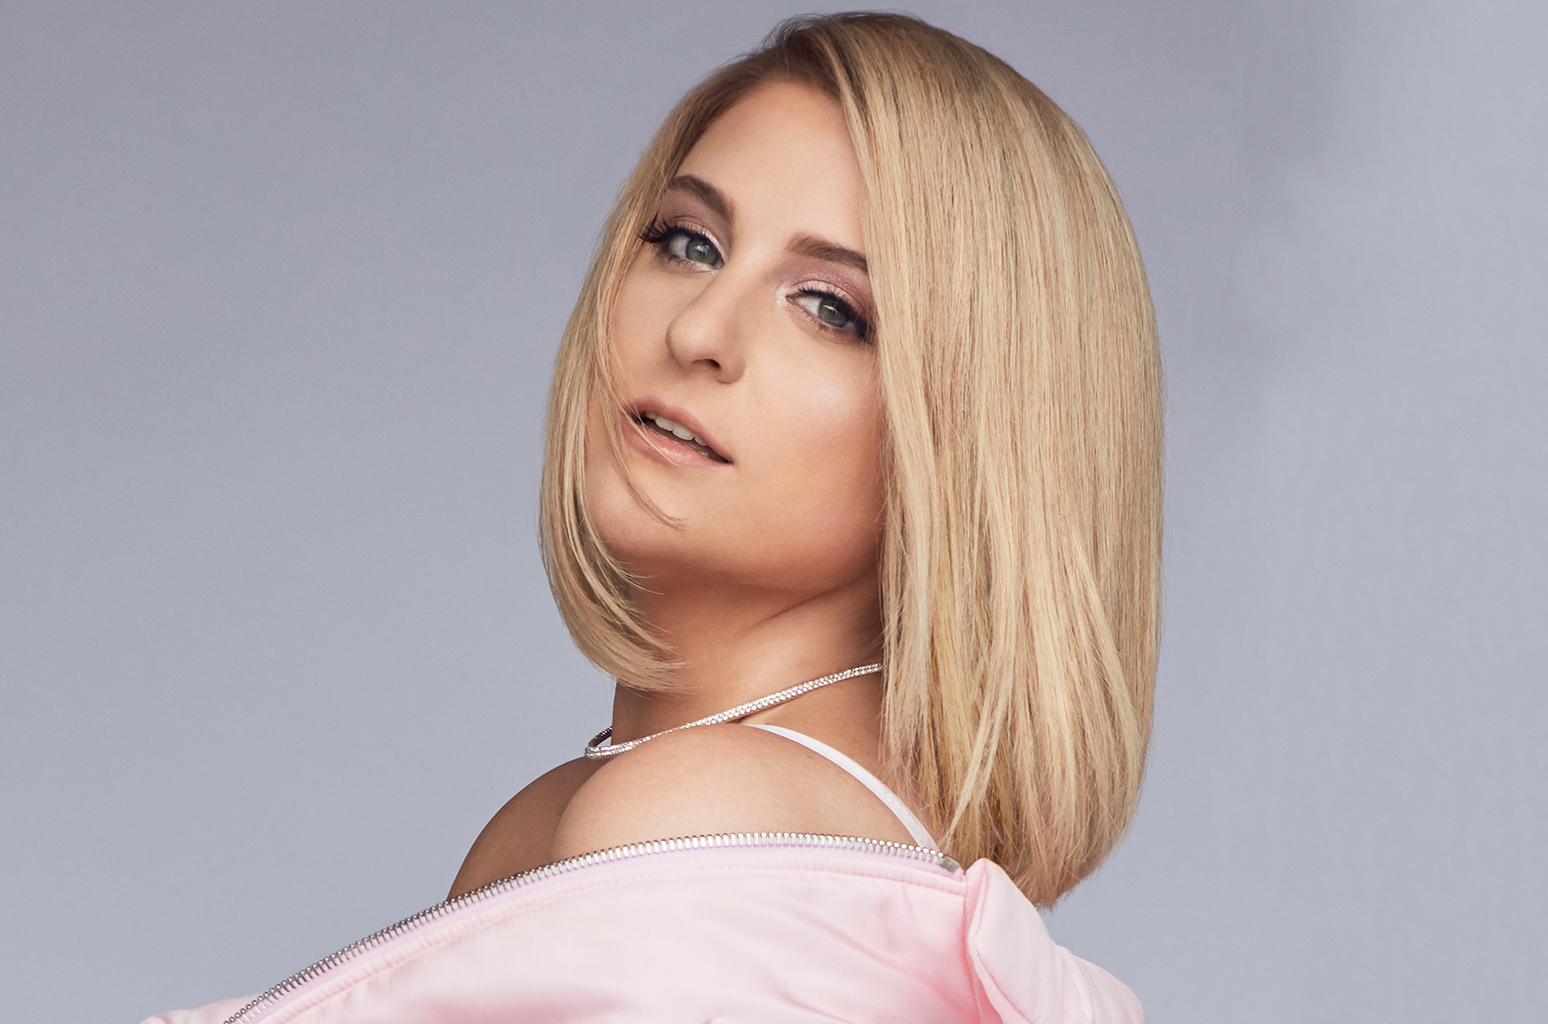 Watch Meghan Trainor Sing 'All About That Bass' to the Tune of Billie Eilish's 'Bad Guy' - www.billboard.com